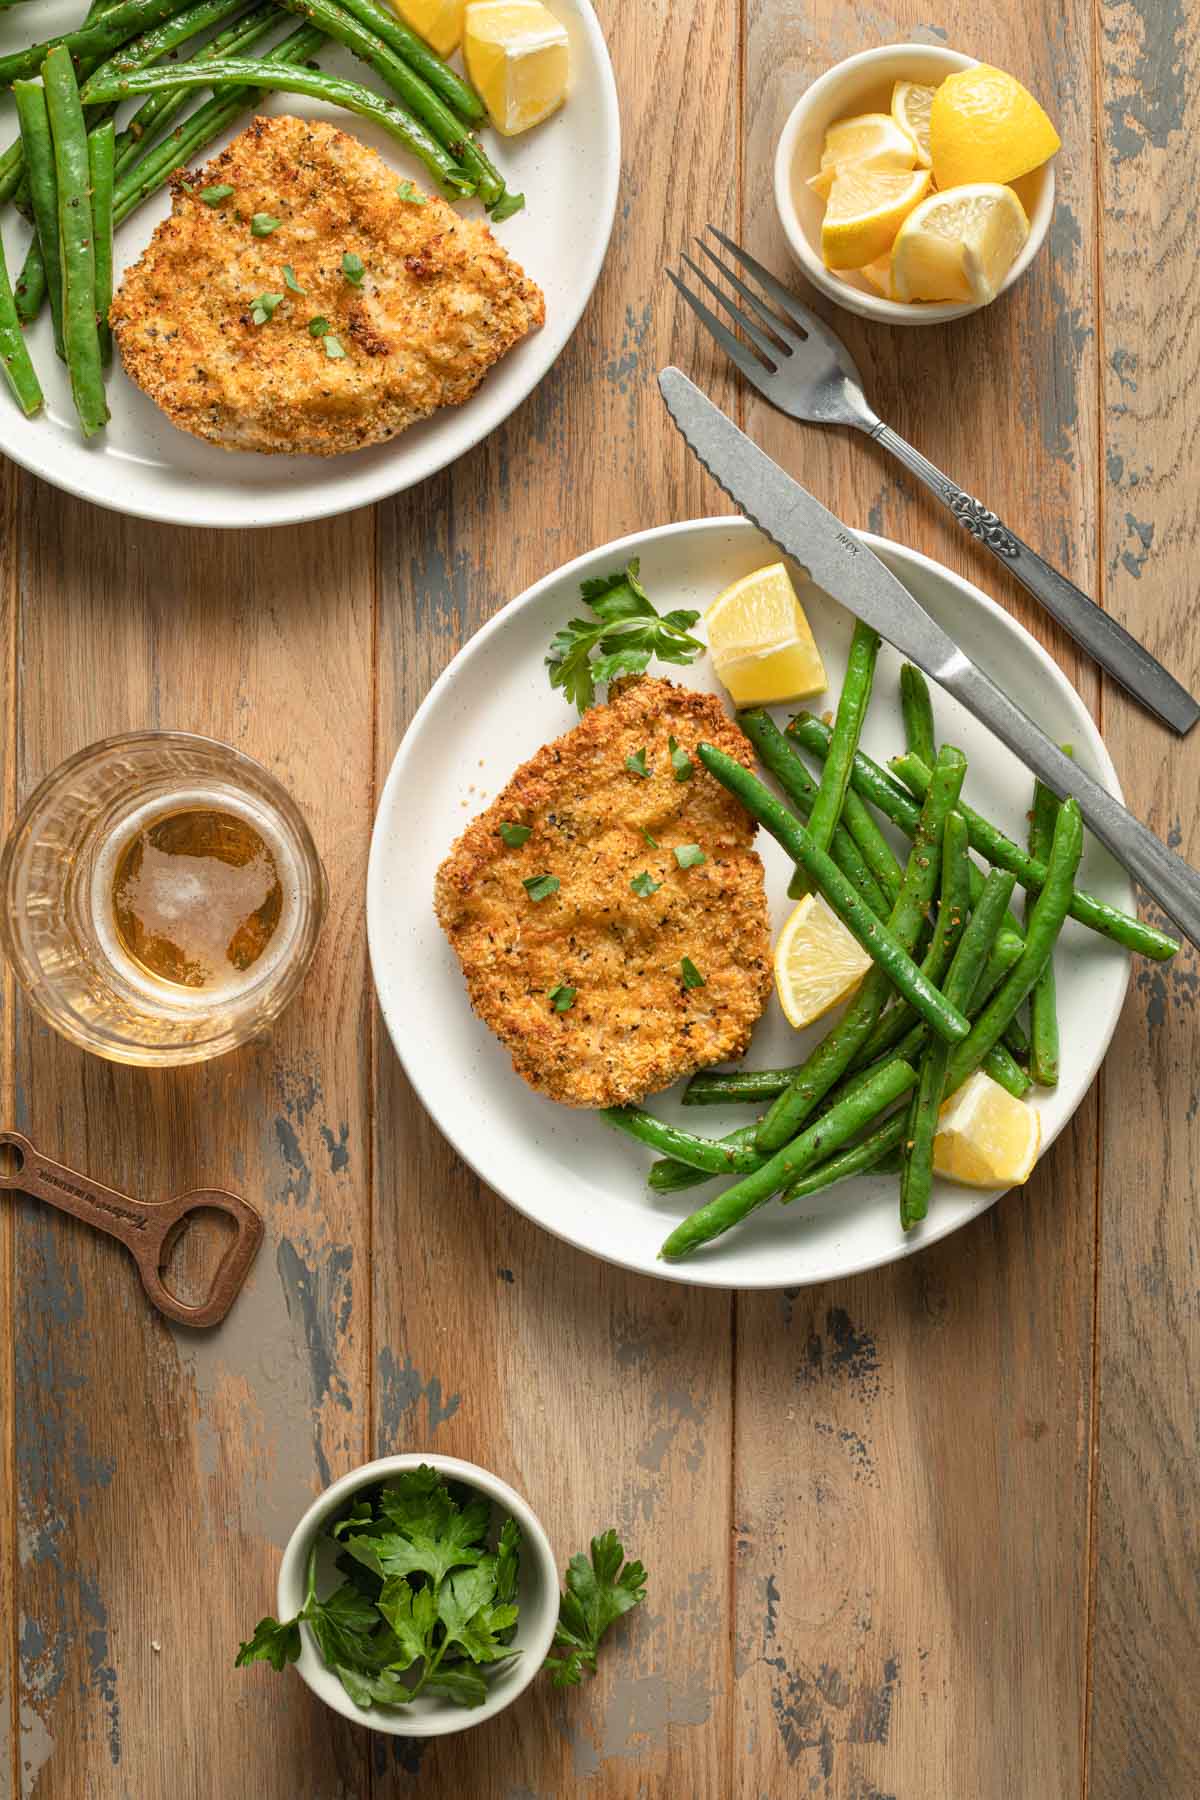 Pork schnitzel on white plates and served with green beans and lemon wedges.